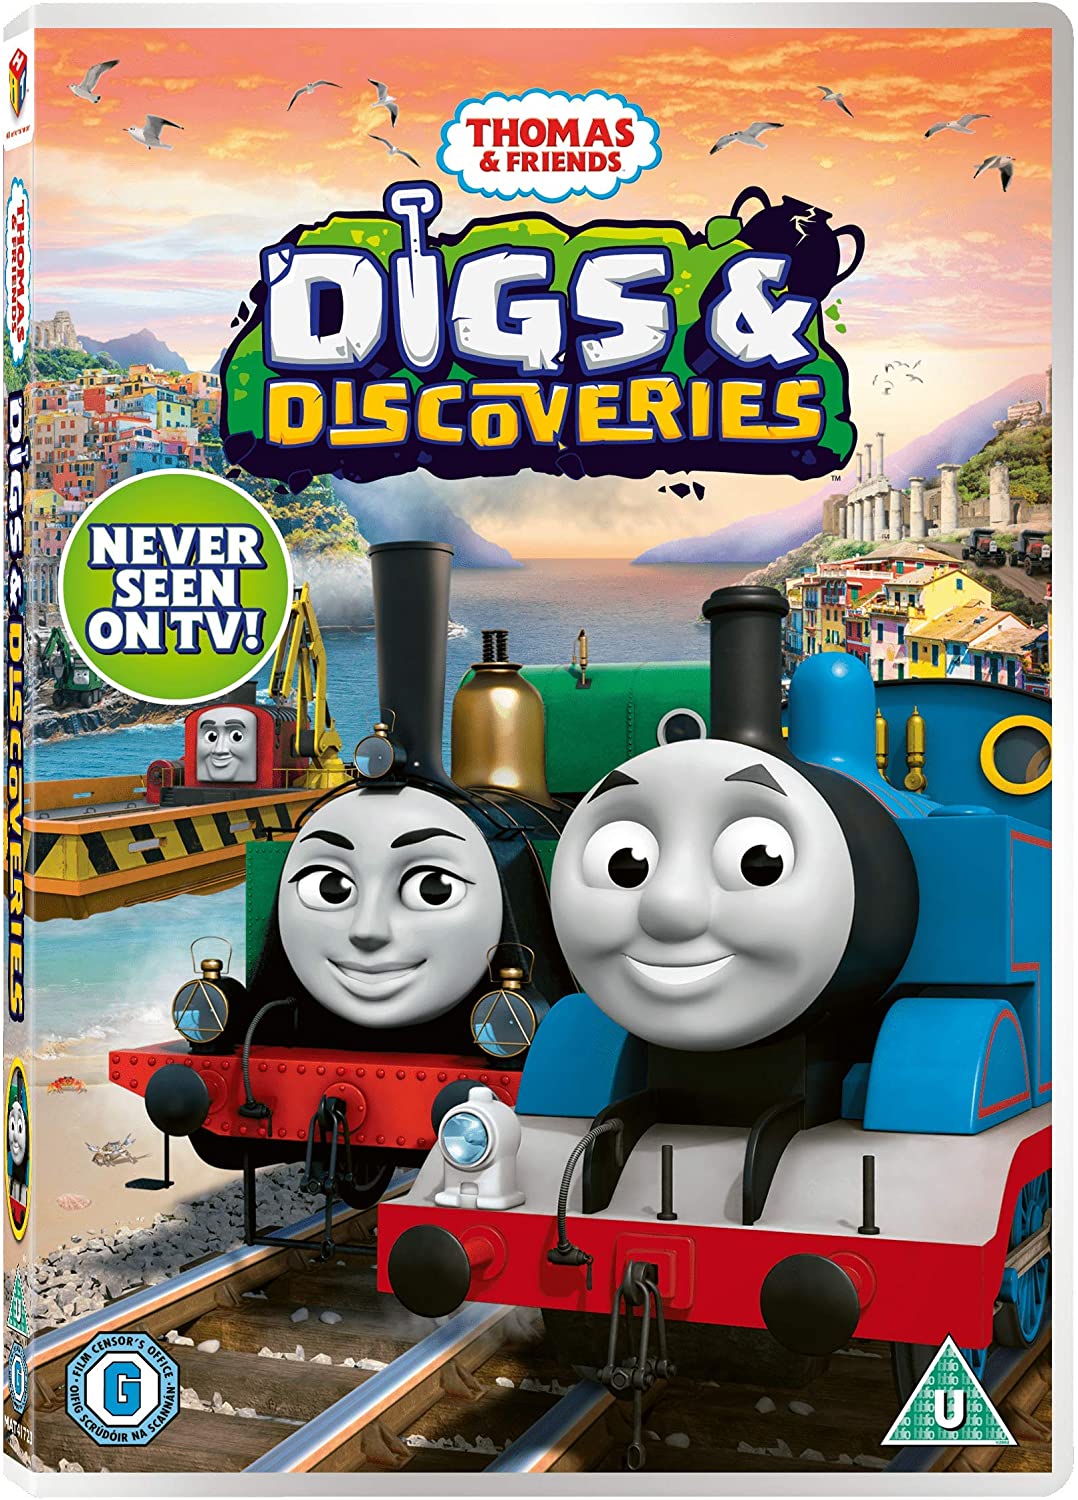 Thomas & Friends - Digs & Discoveries - Family [DVD]